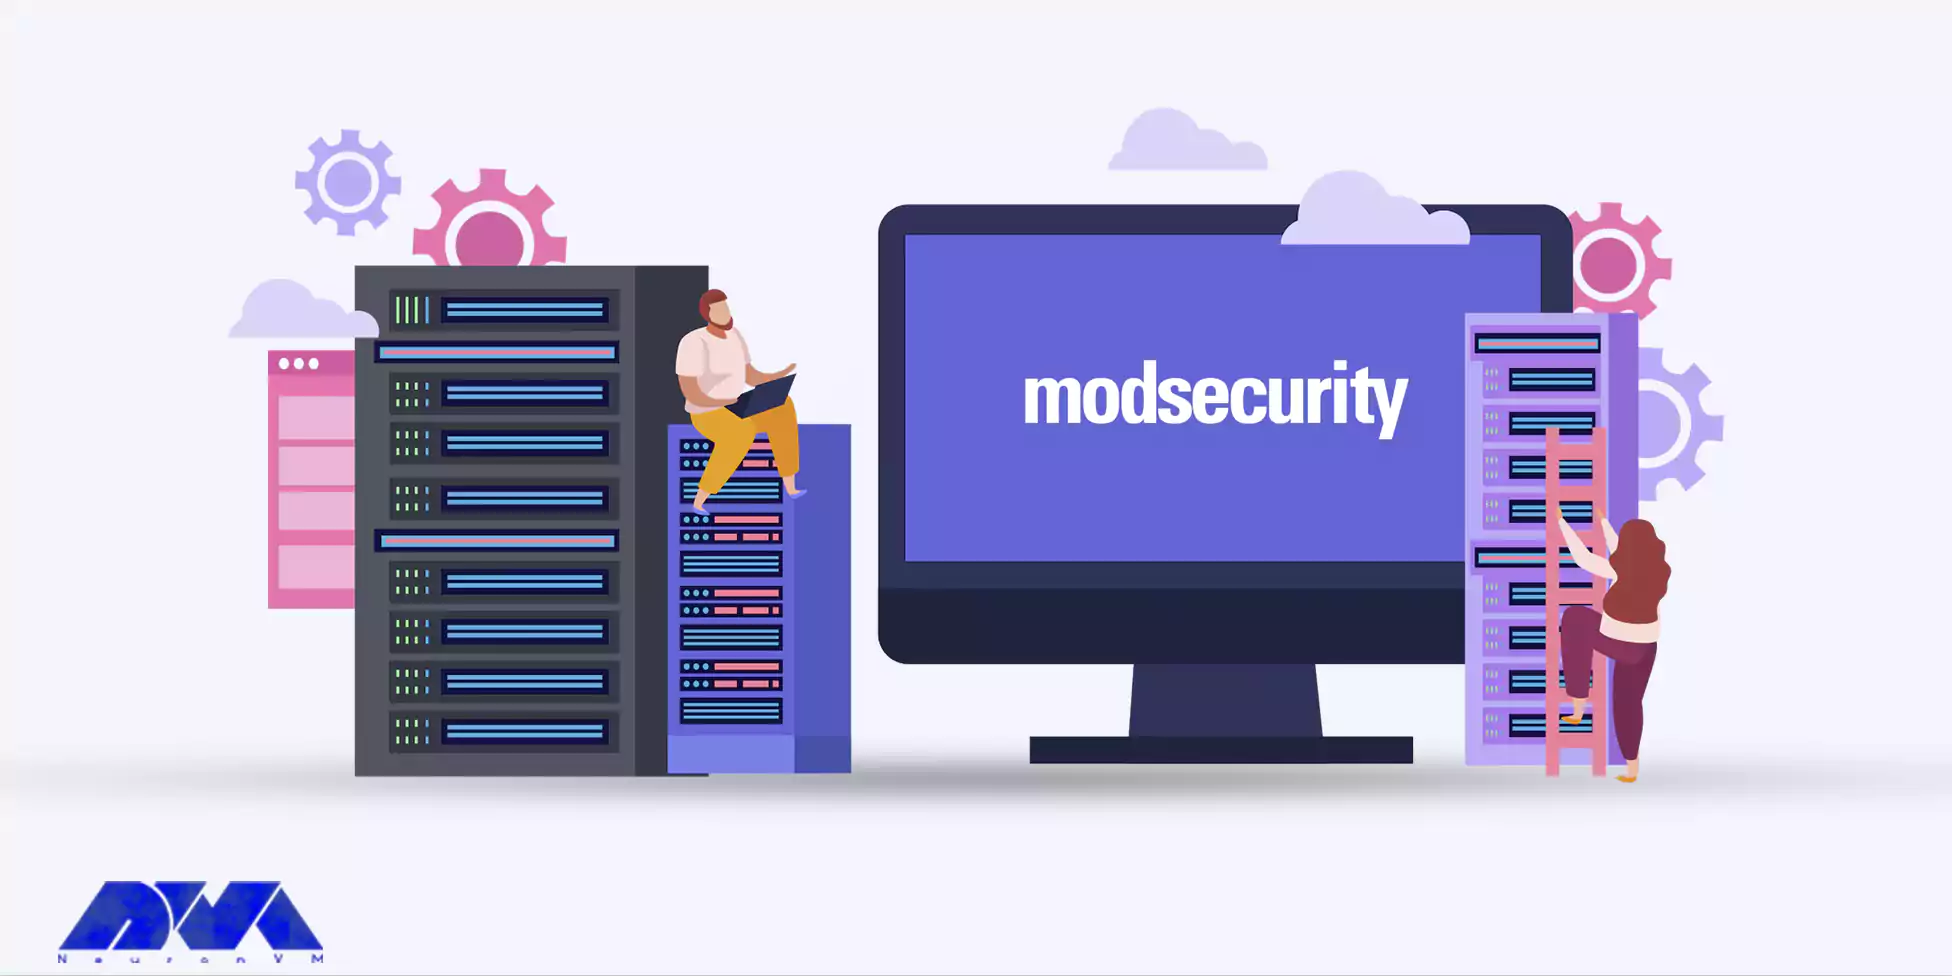 What is ModSecurity